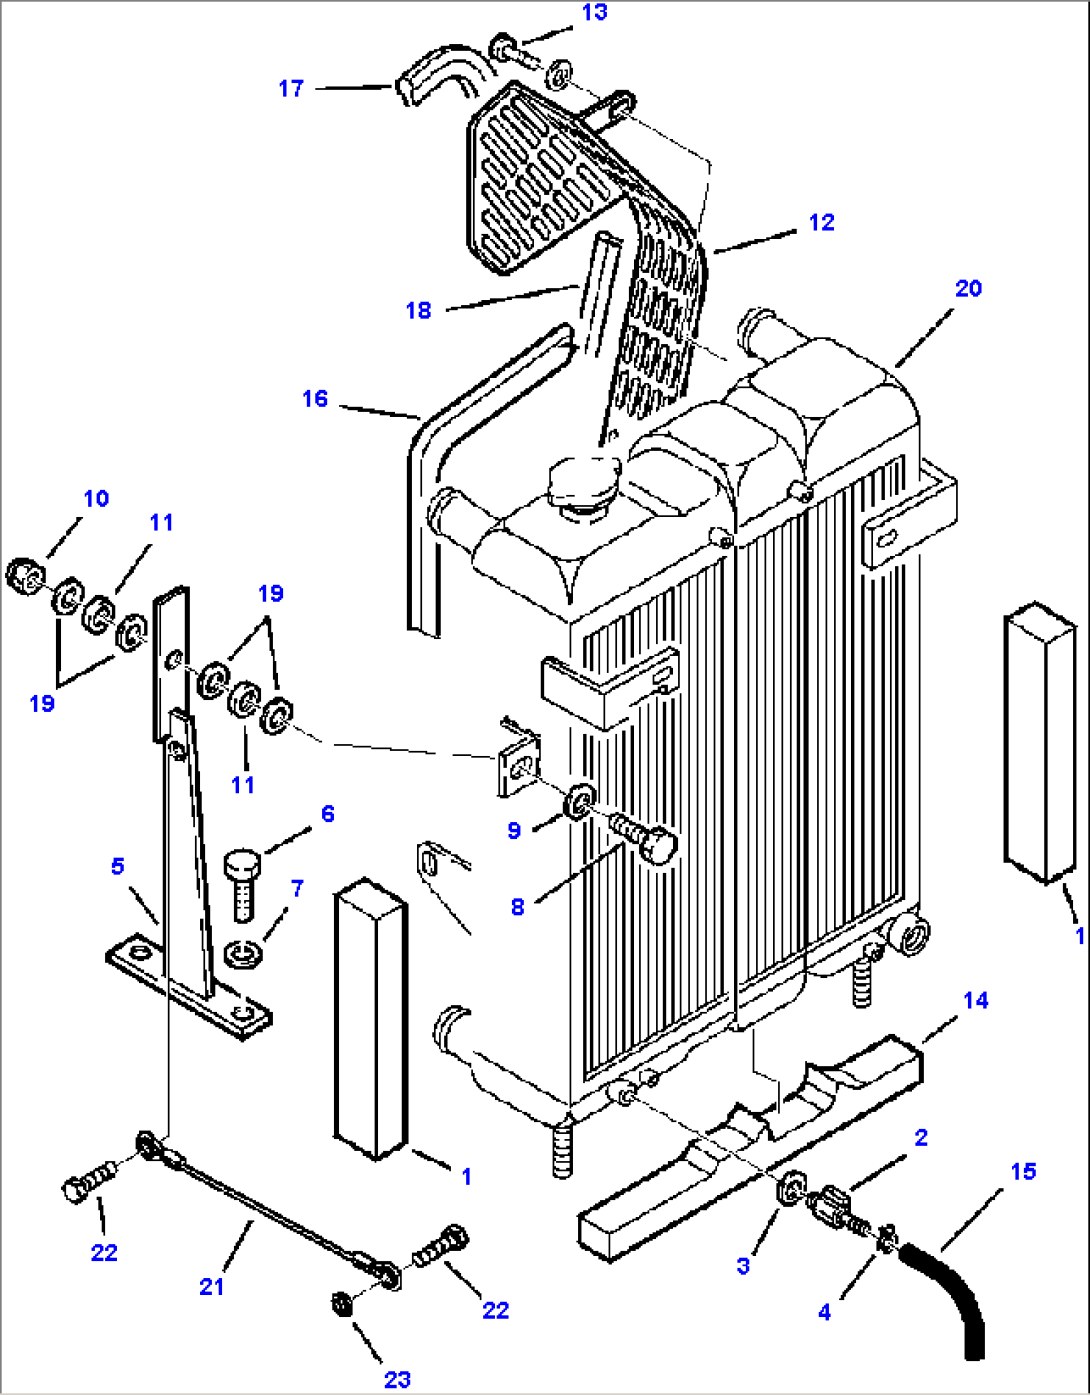 FIG. C1200-01A0 RADIATOR CONNECTIONS